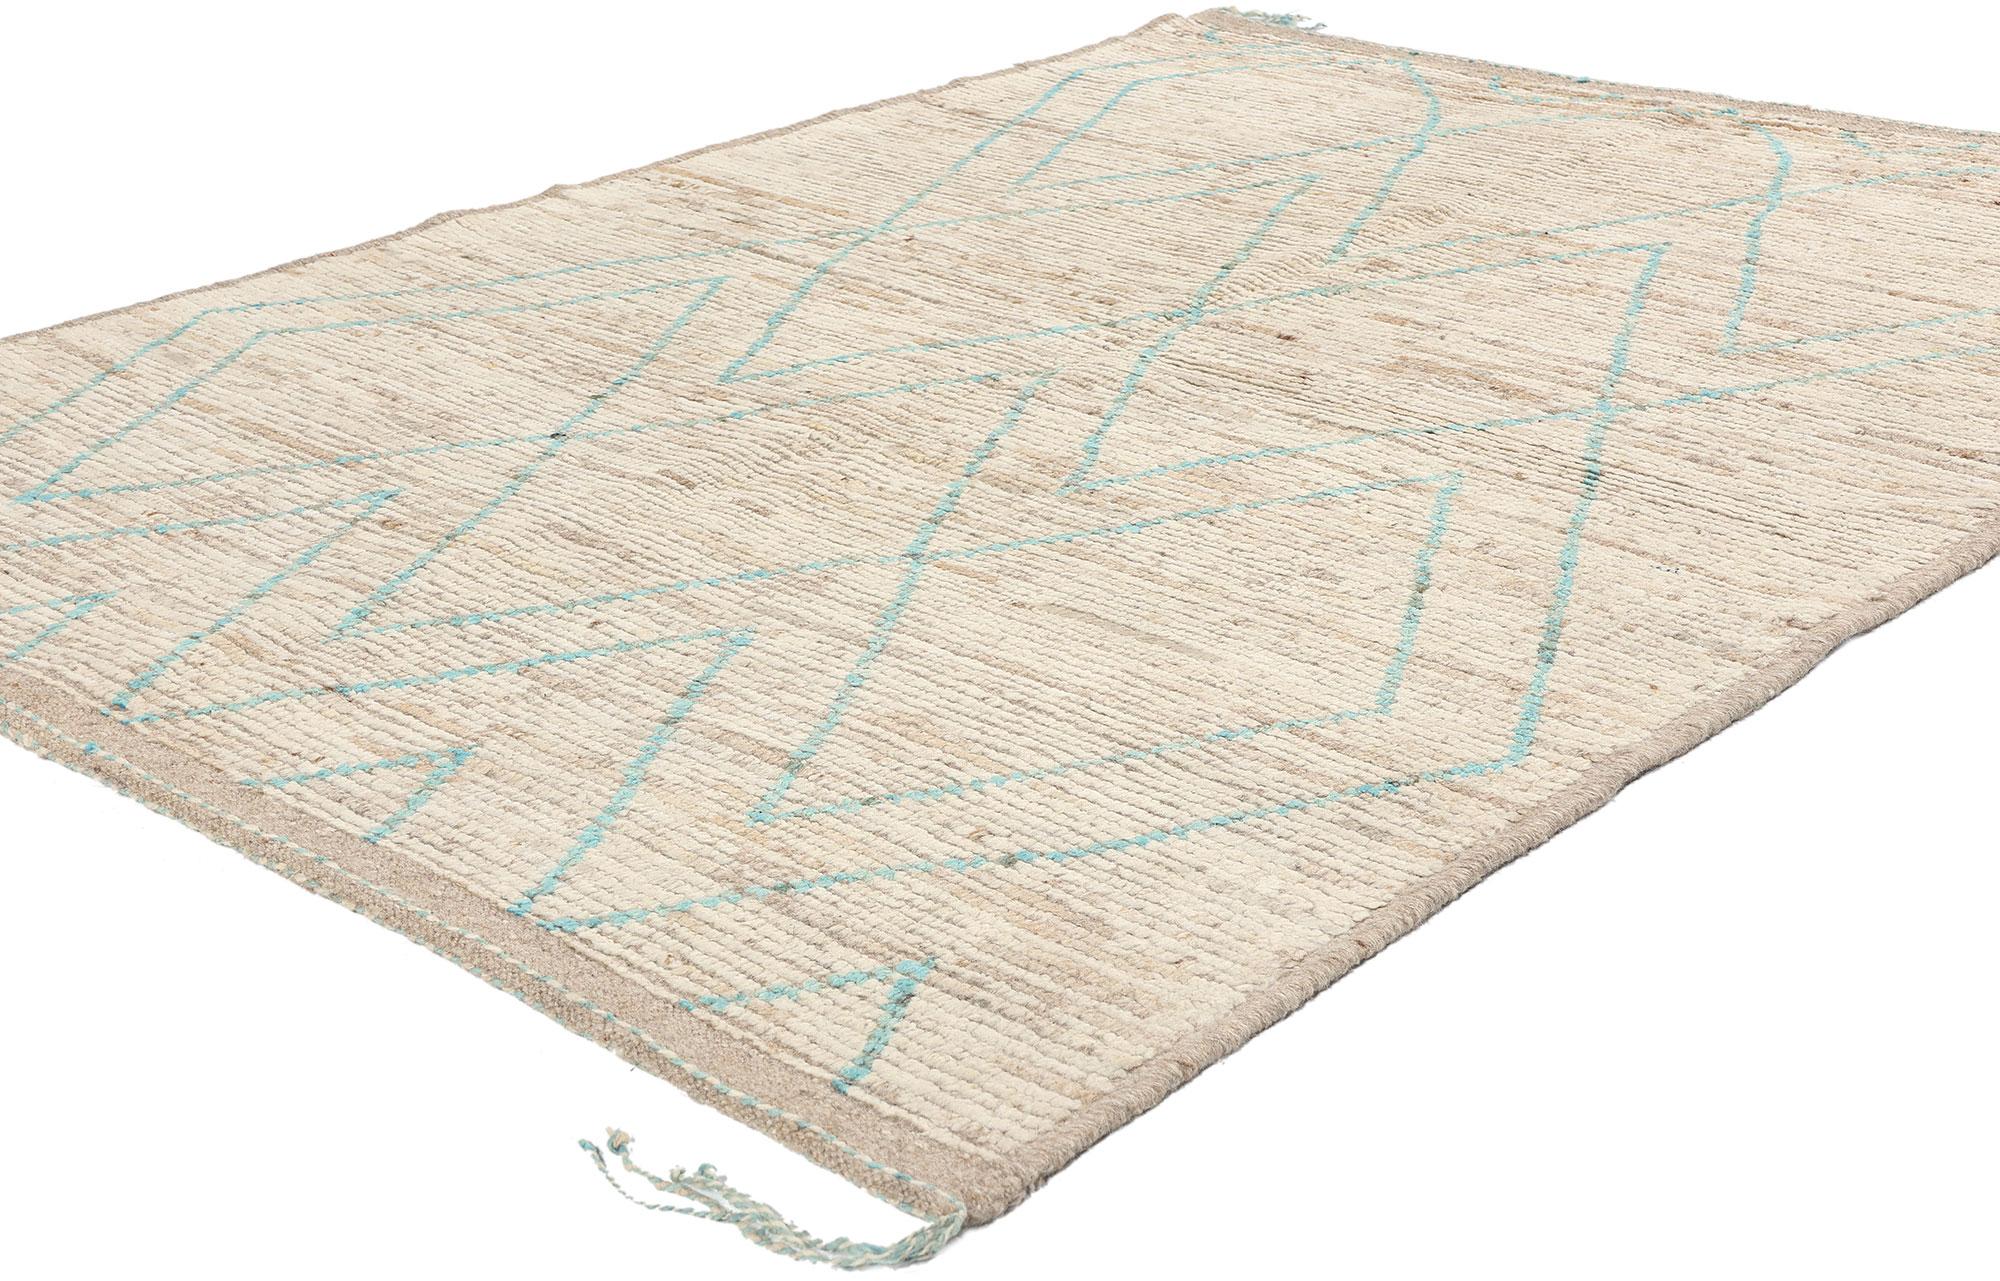 80783 New Soft Earth-Tone Moroccan Rug with Short Pile 05'00 x 06'08. Pakistani Moroccan rugs, meticulously crafted in Pakistan, stand out for their exceptional quality and craftsmanship, drawing inspiration from the intricate designs and motifs of